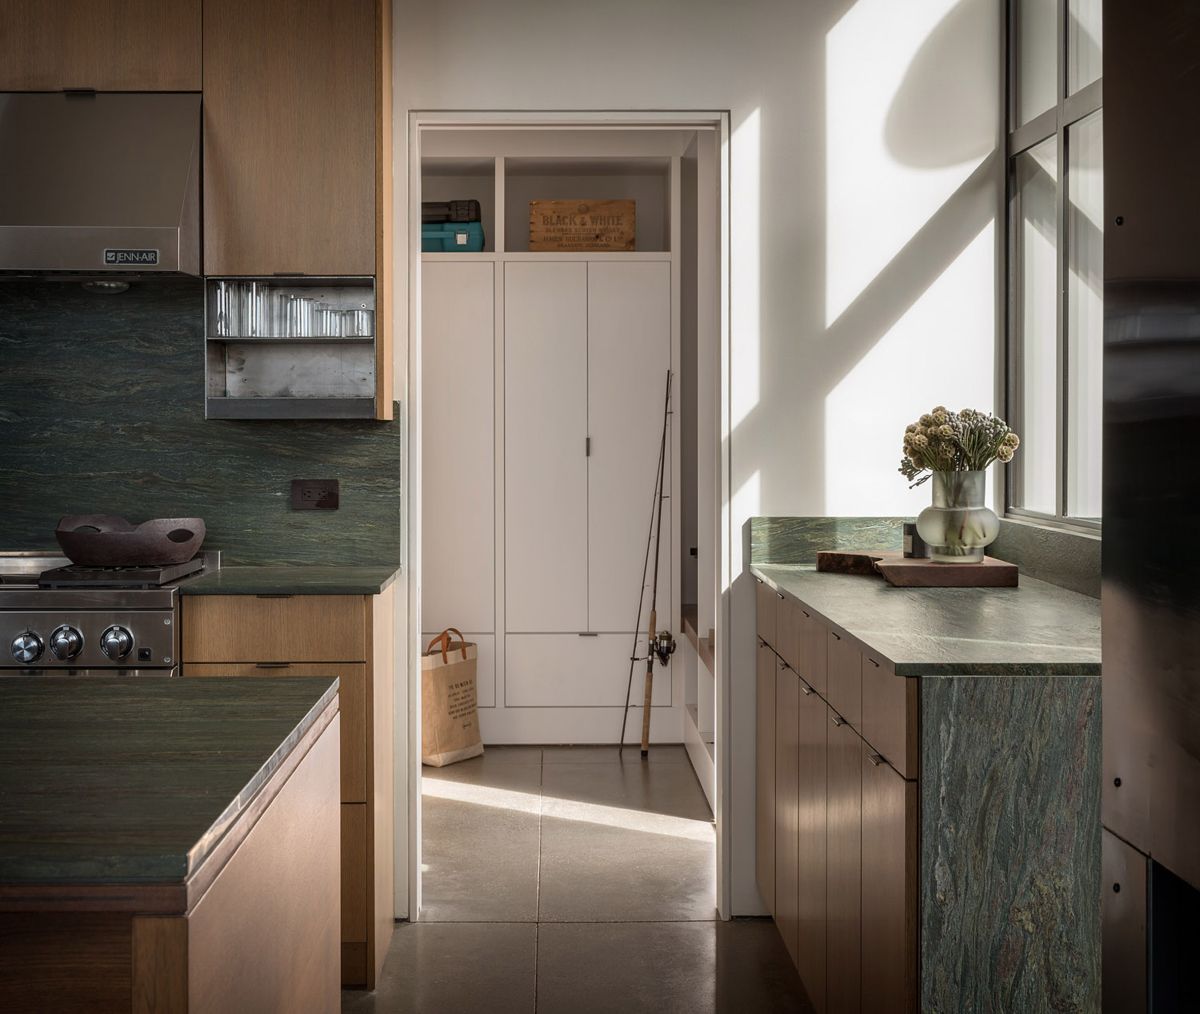 The kitchen is done with light colored wood and green stone